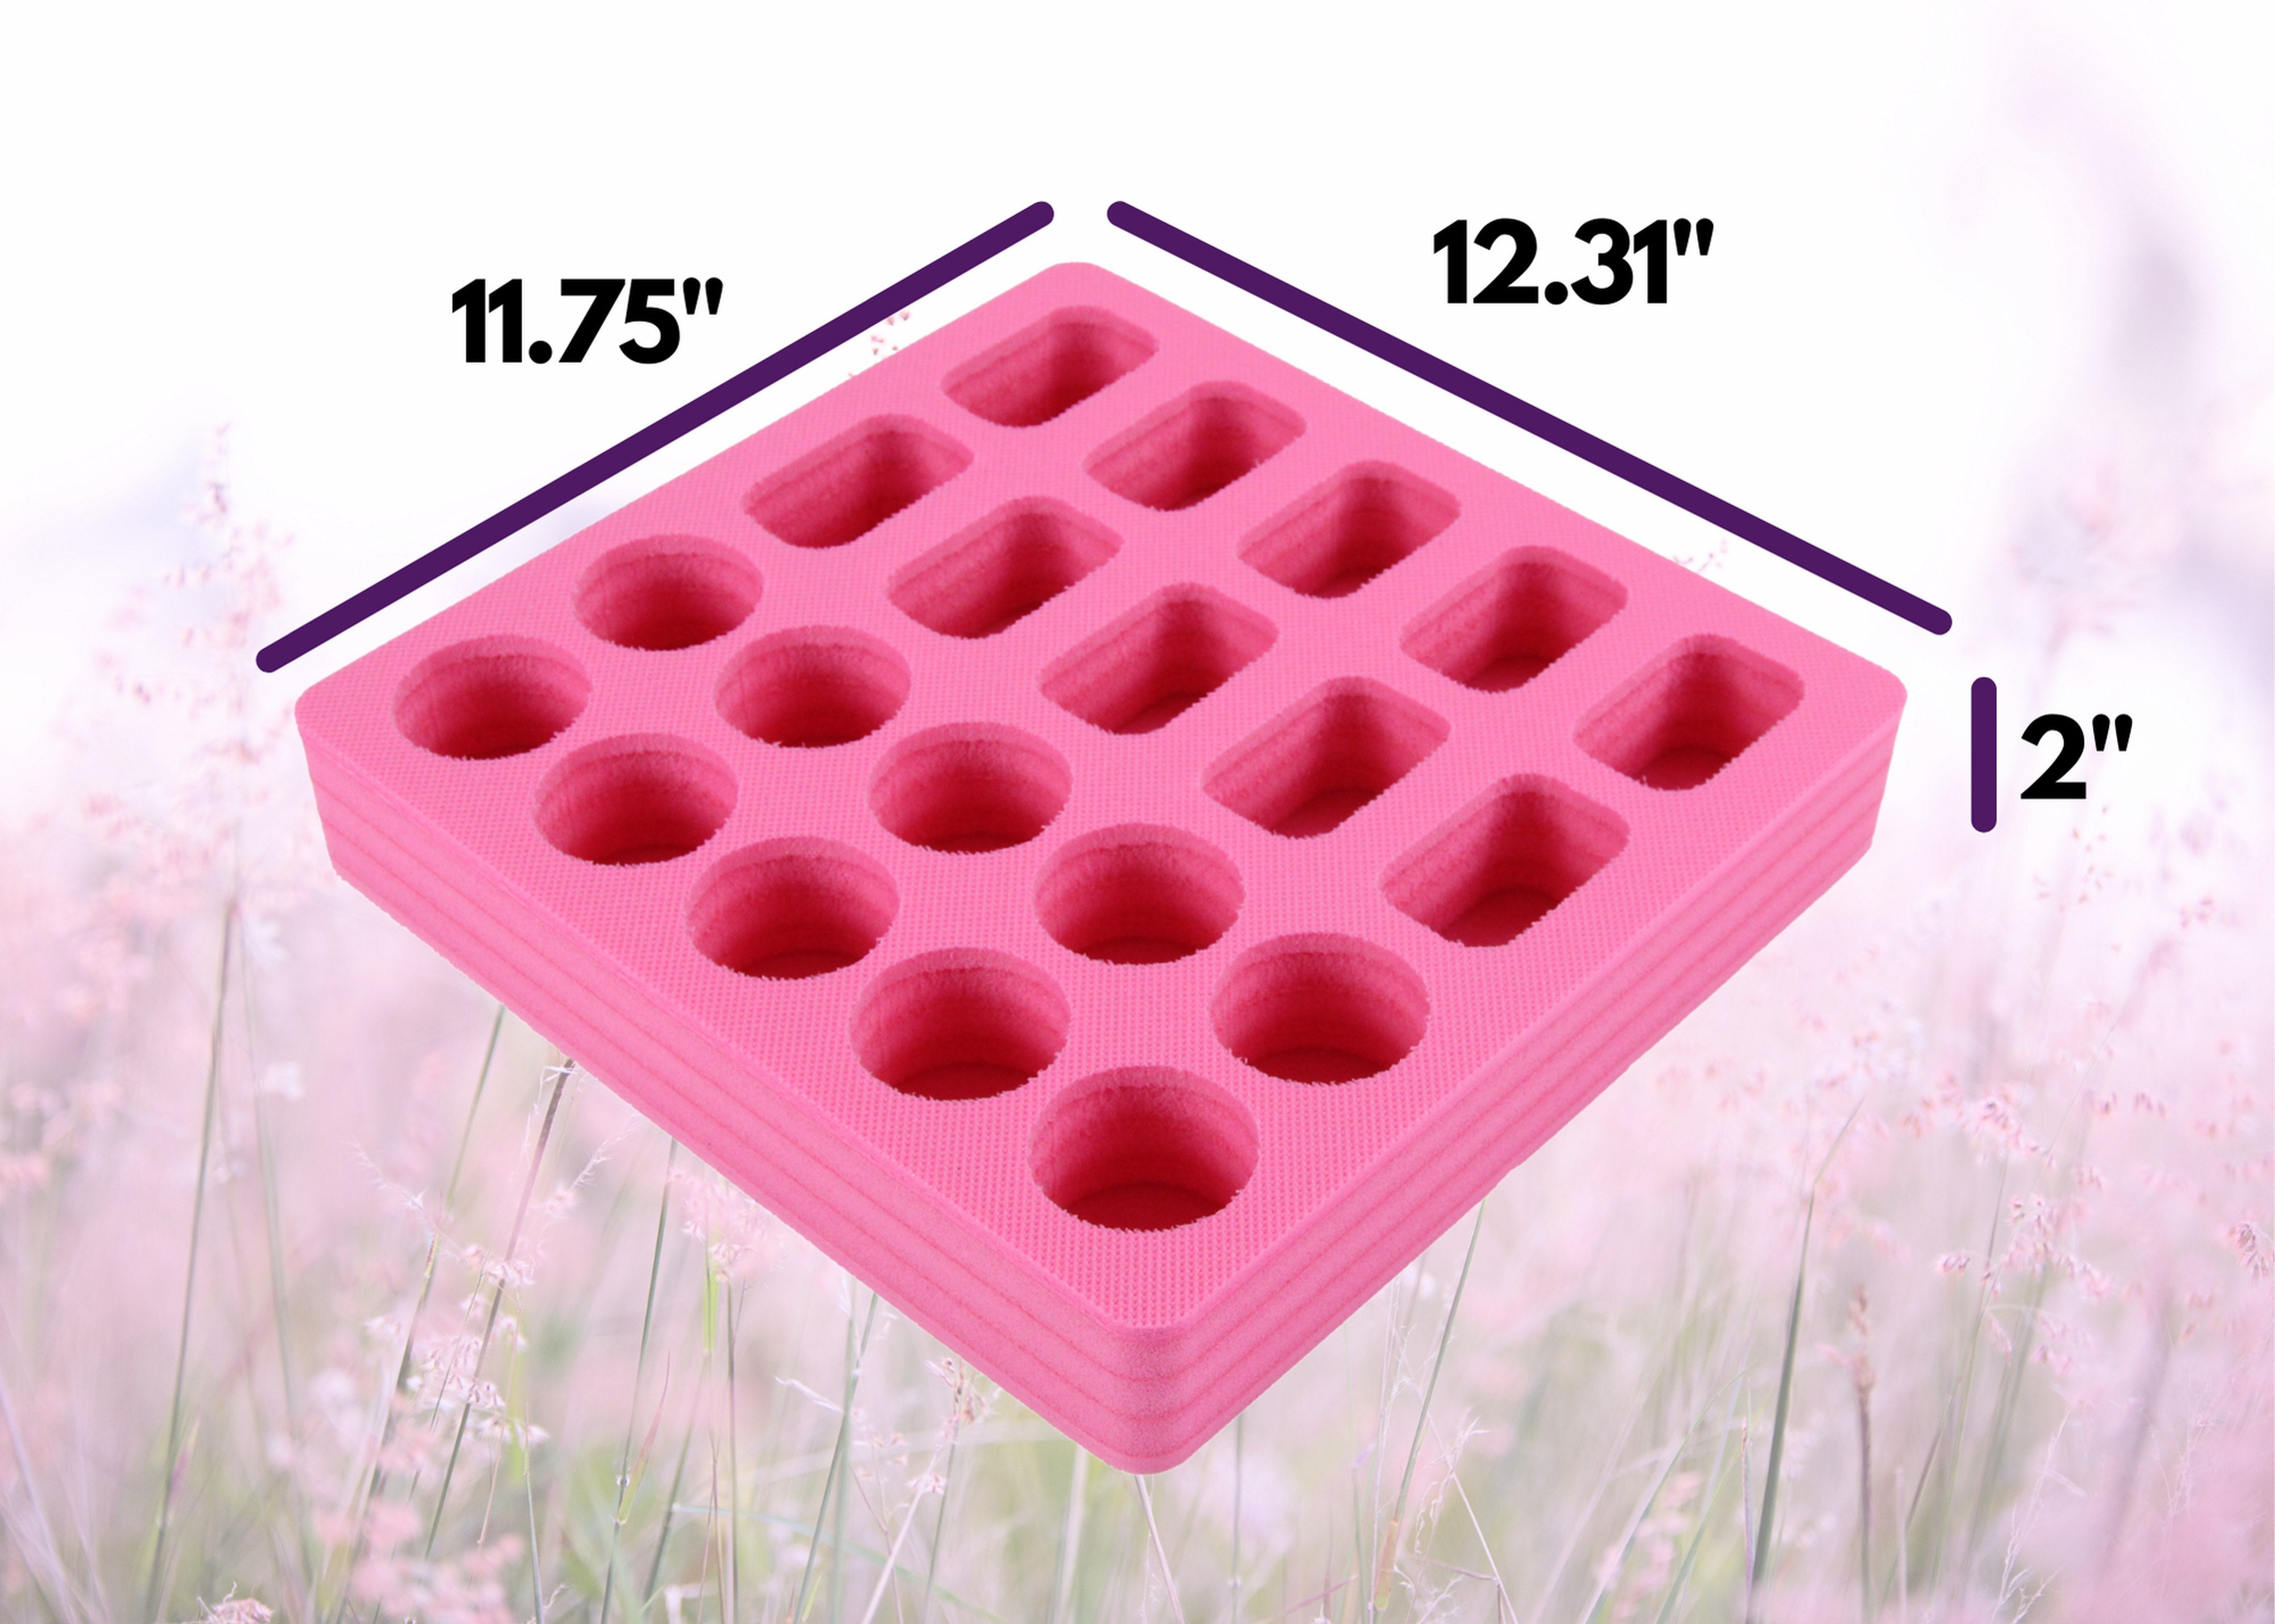 Lotion Body Spray St Organizer Large Tray Durable Foam Washable Waterproof Insert for Home Bathroom Bedroom Office 12.3 x 11.75 x 2 Inches 20 Slots